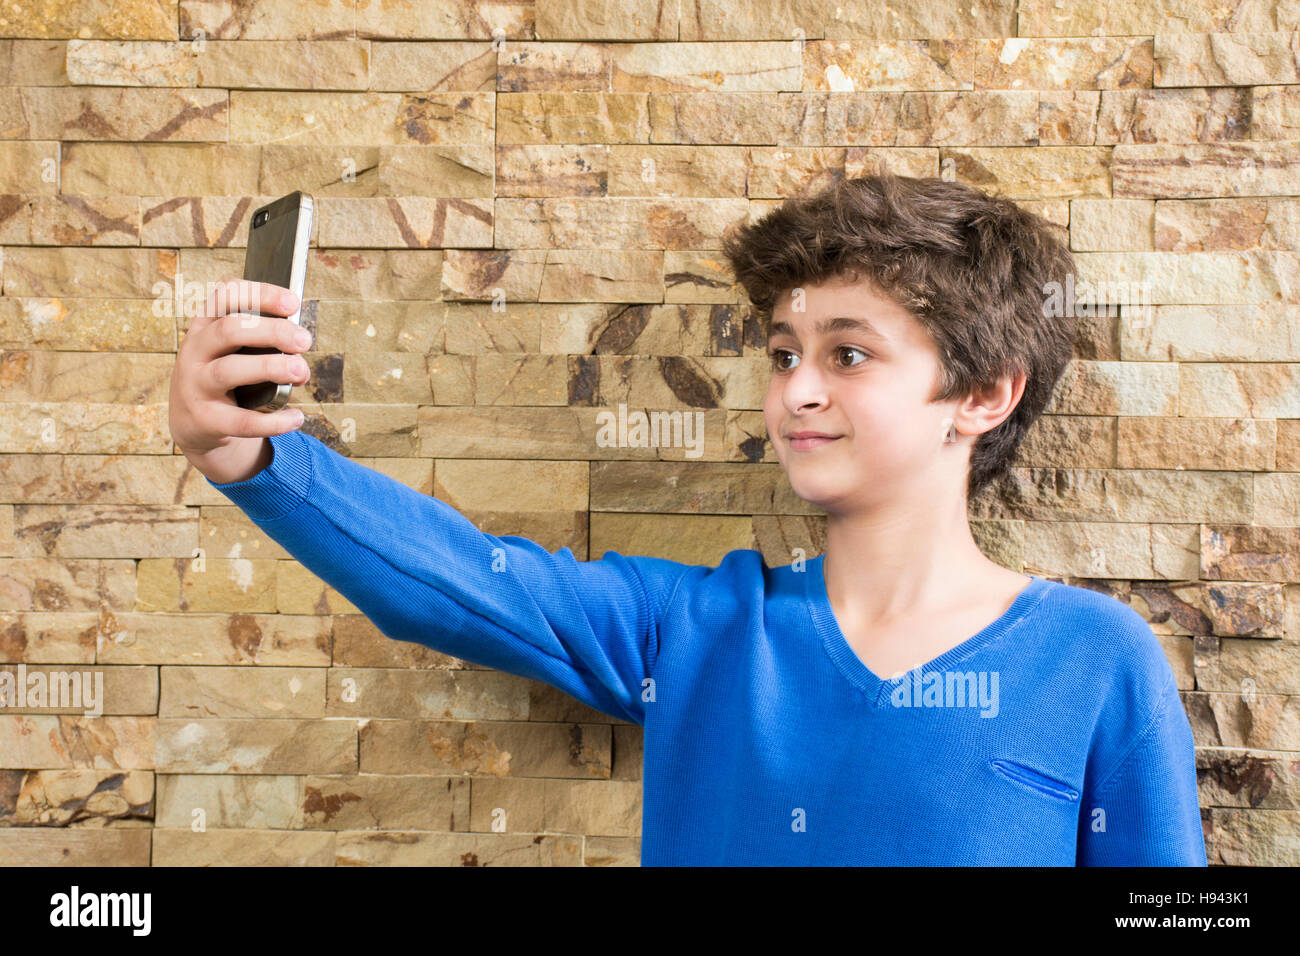 10 years old boy taking a selfie picture using a mobile phone camera Stock Photo